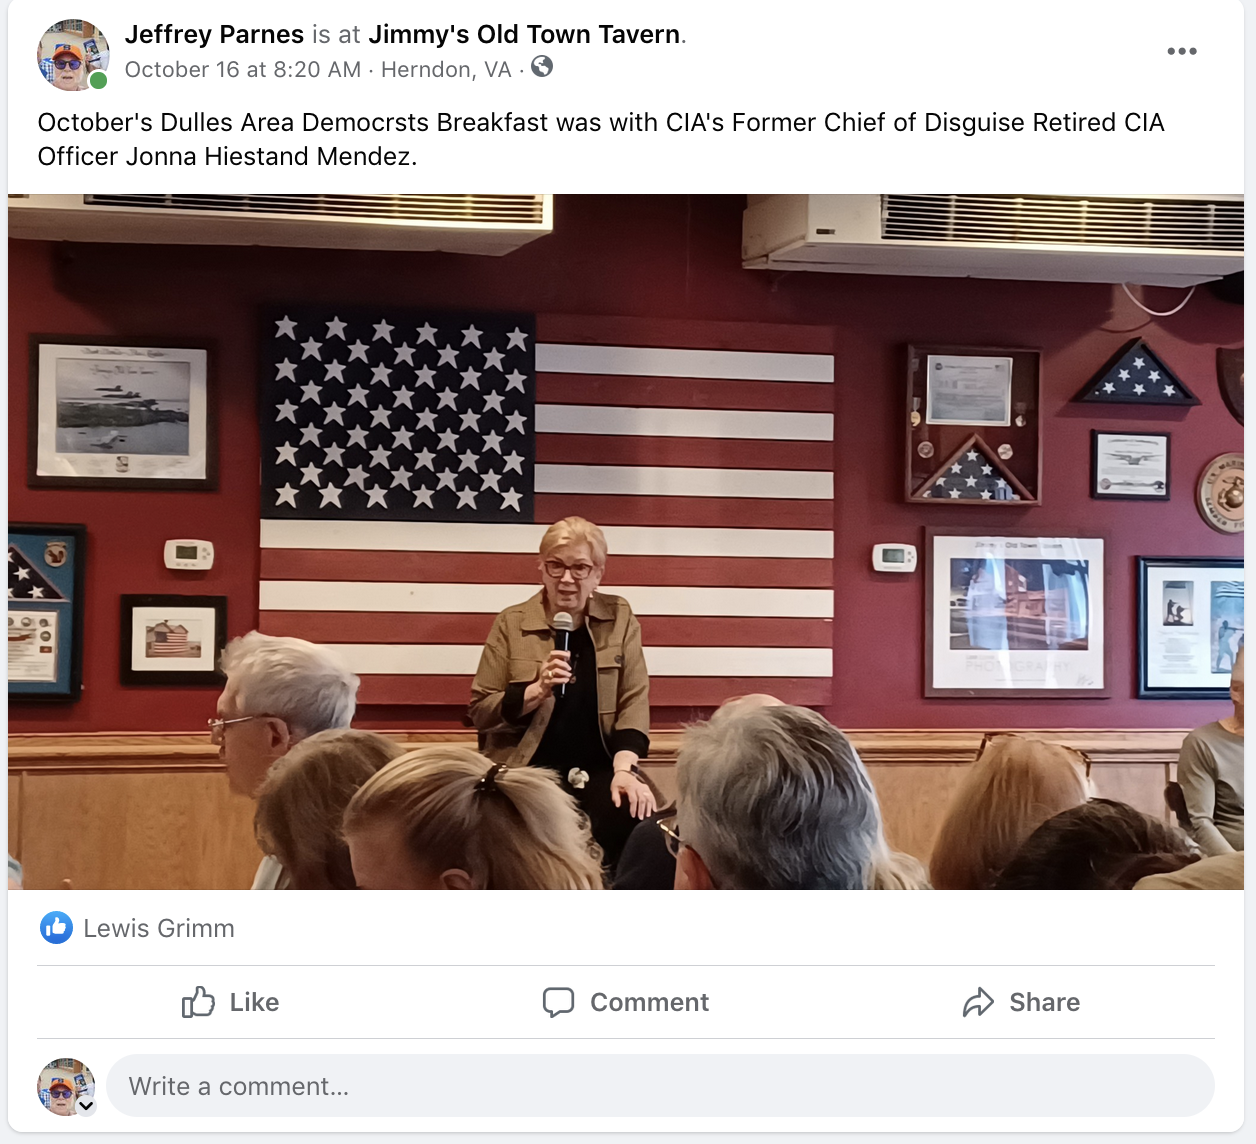 October's Dulles Area Democrats Breakfast was with CIA's Former Chief of Disguise Retired CIA Officer Jonna Hiestand Mendez